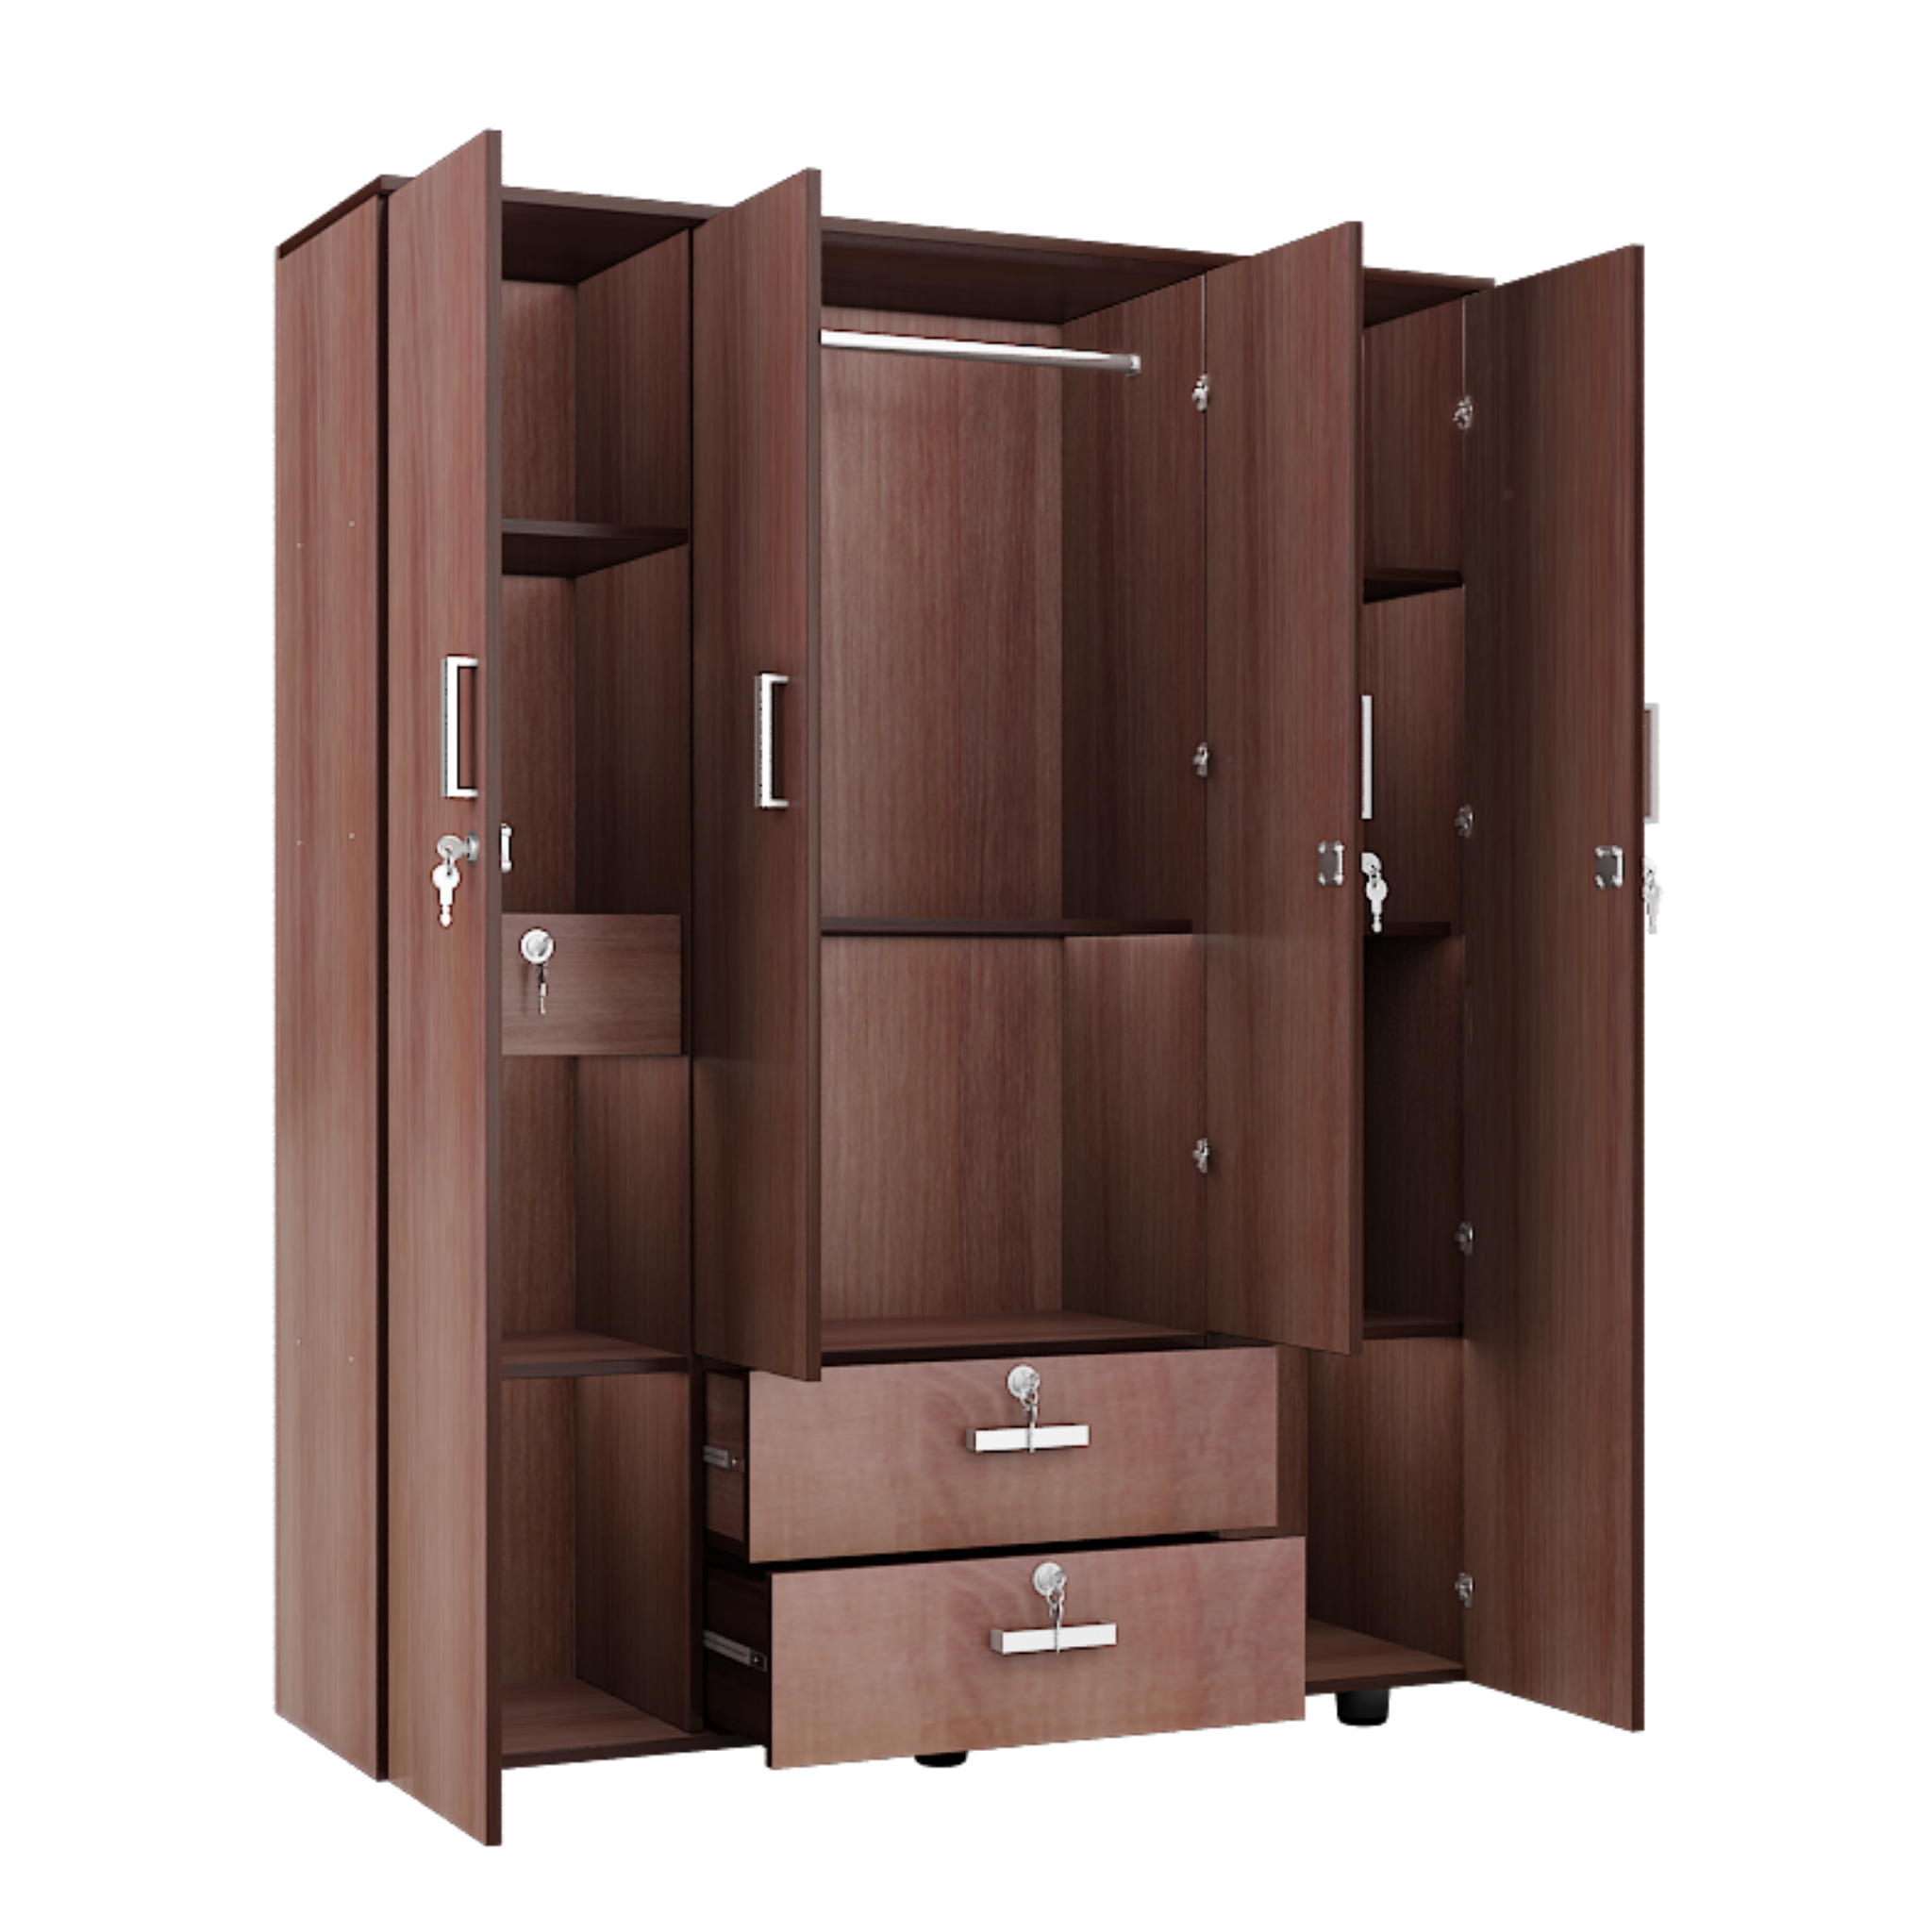 Super and Luxury Four Door Wardrobe with Pull Drawer